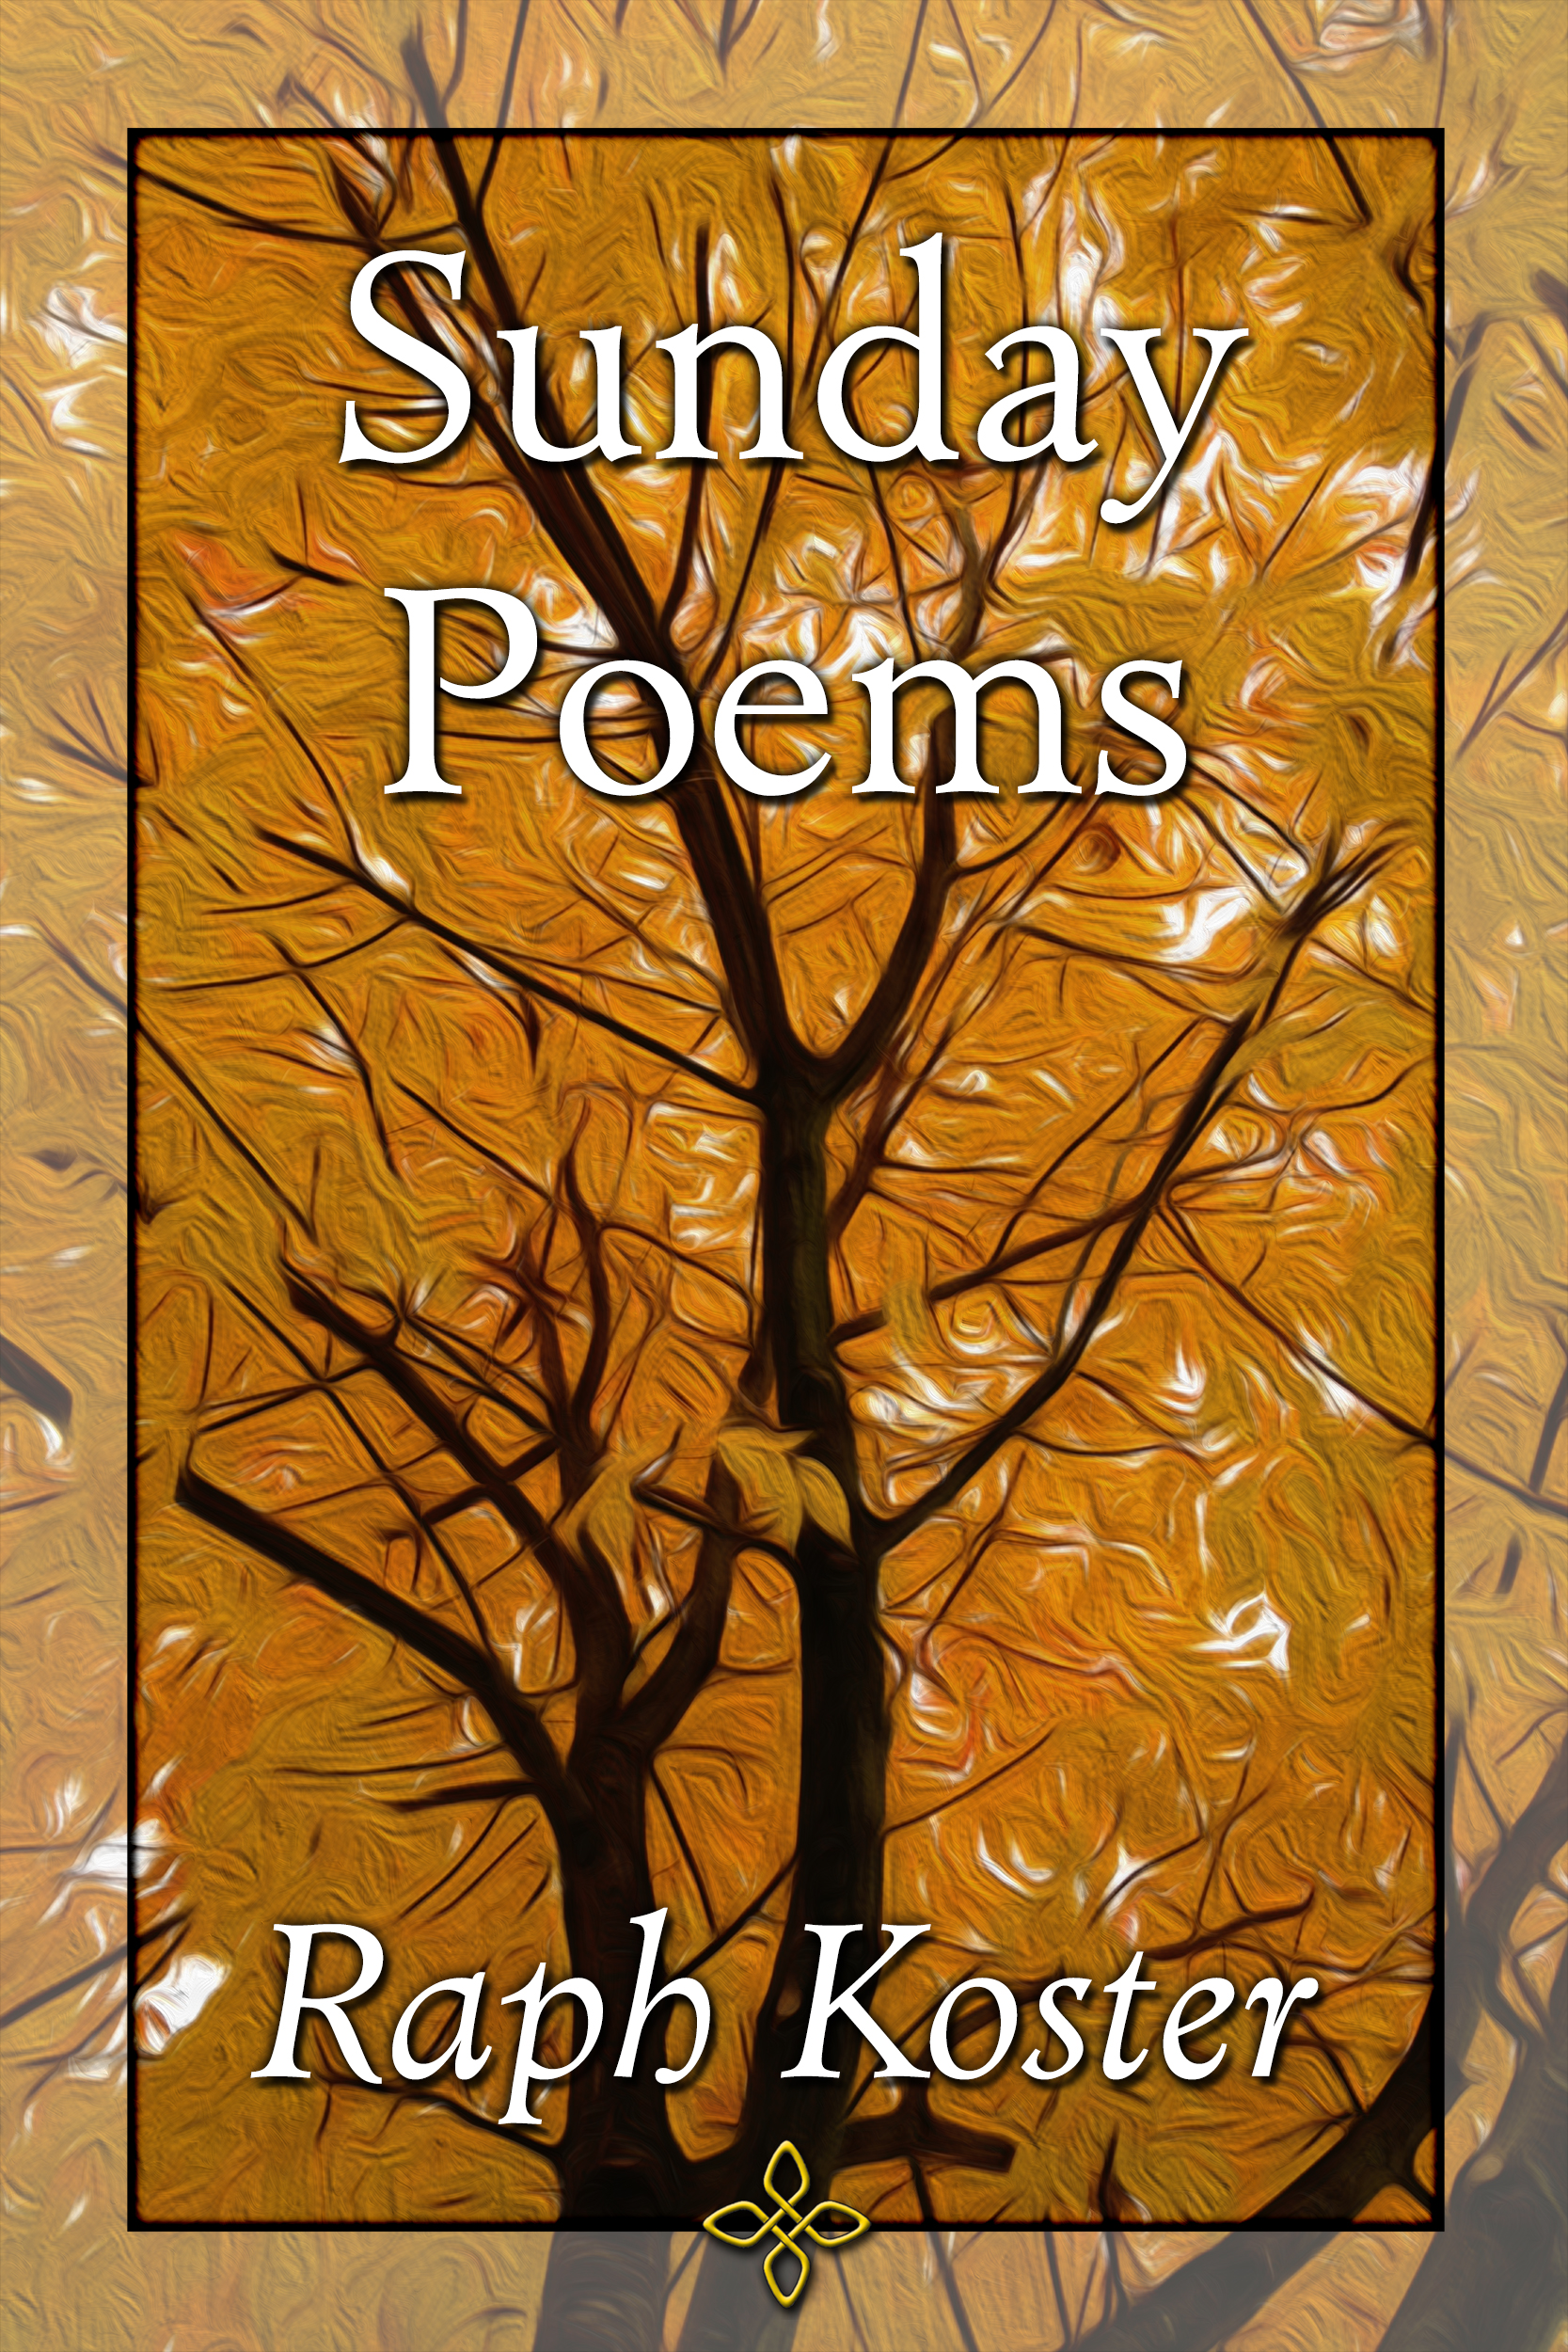 The cover of "Sunday Poems"